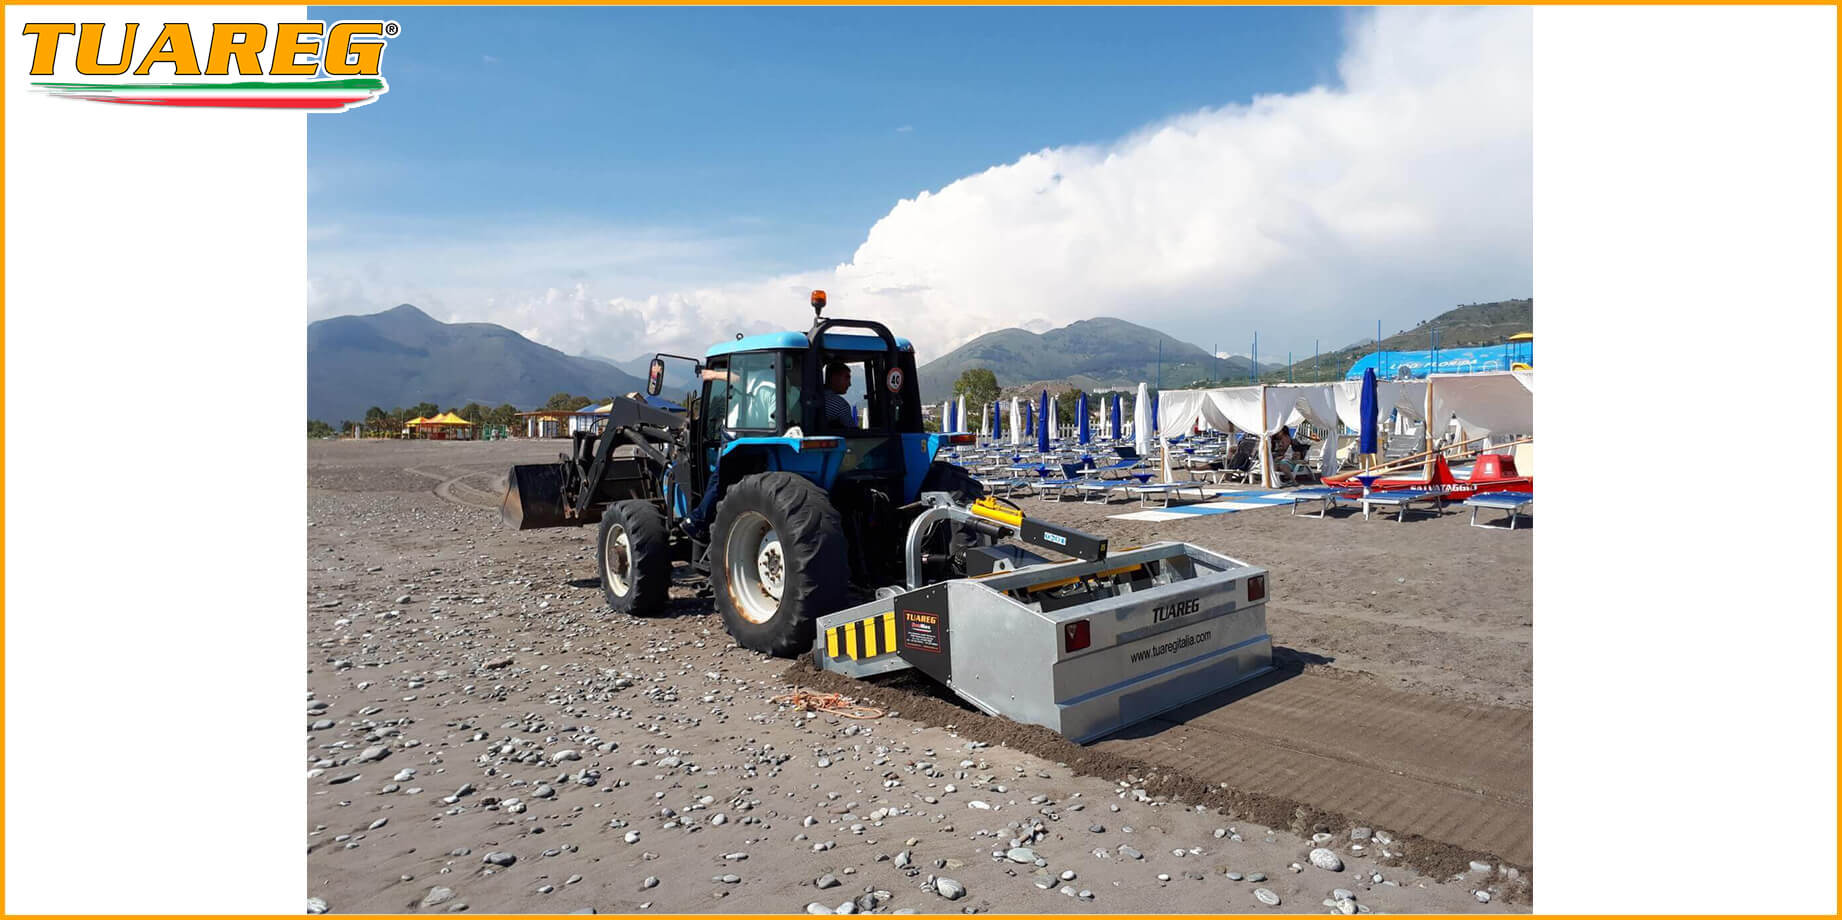 Tuareg EvoMax - Beach Cleaning Machine - Attached to a Tractor